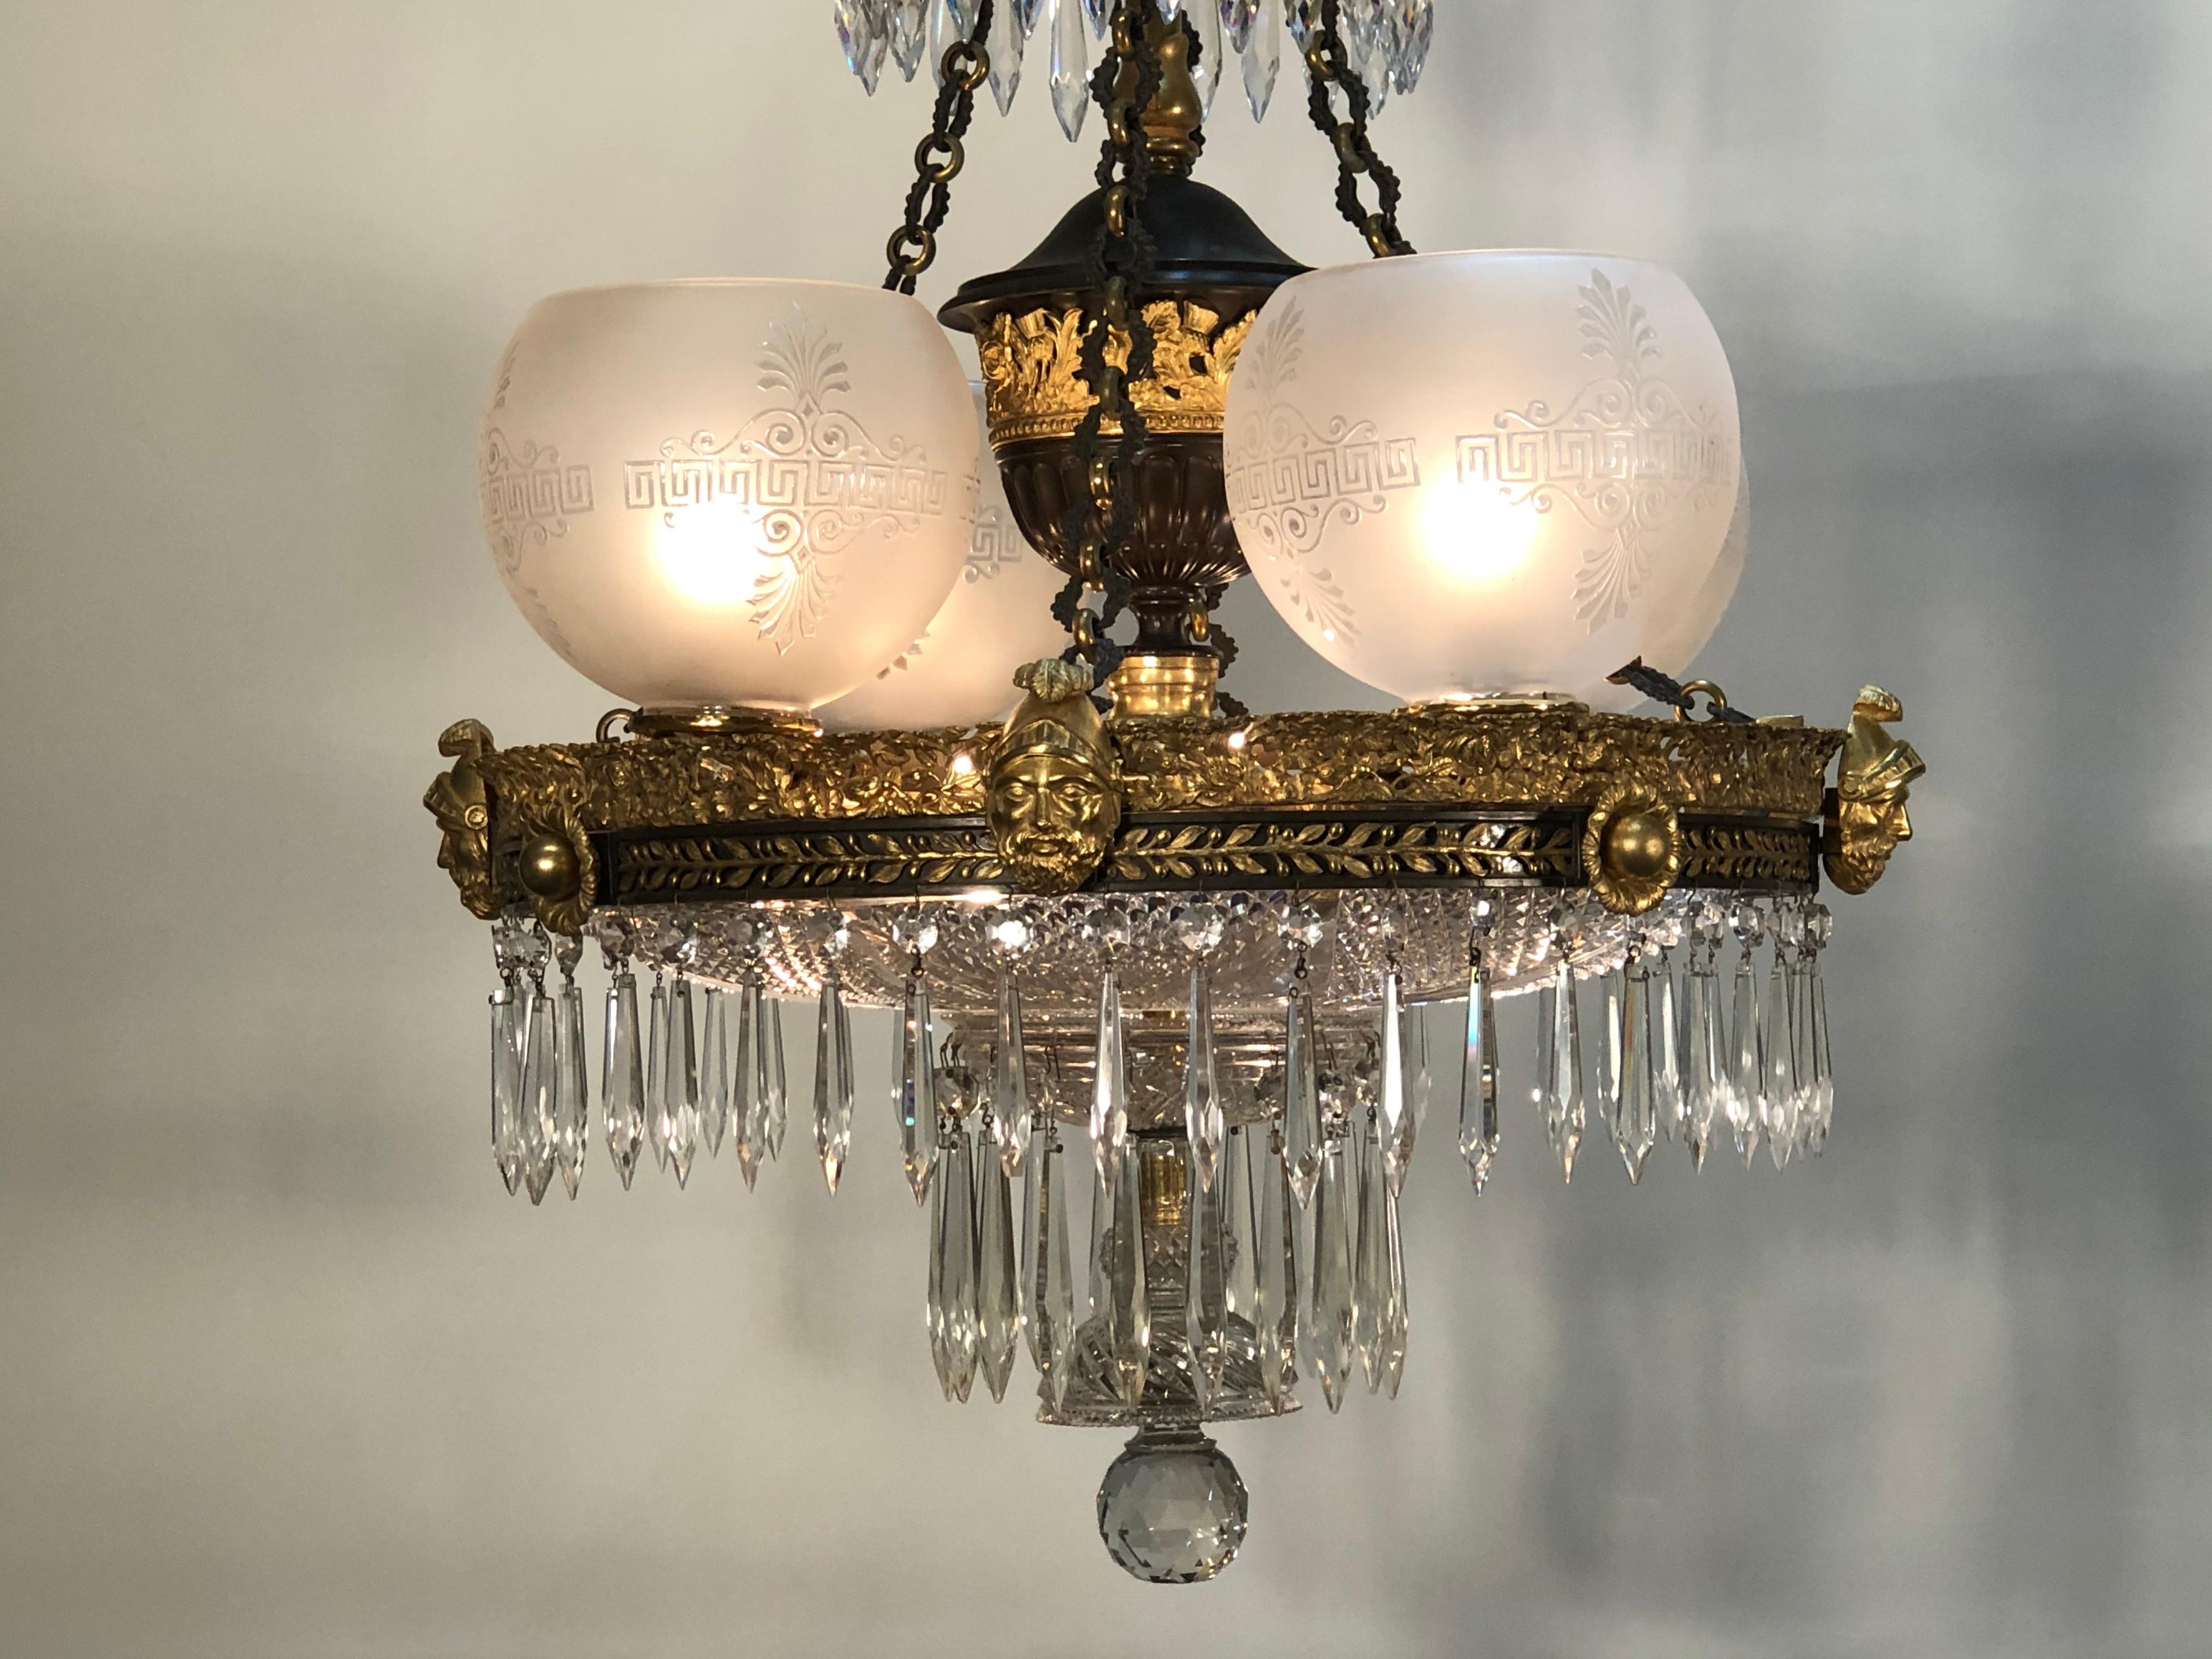 Patinated 19th Century English Regency Crystal and Bronze Gasolier, Johnston Brookes & Co.